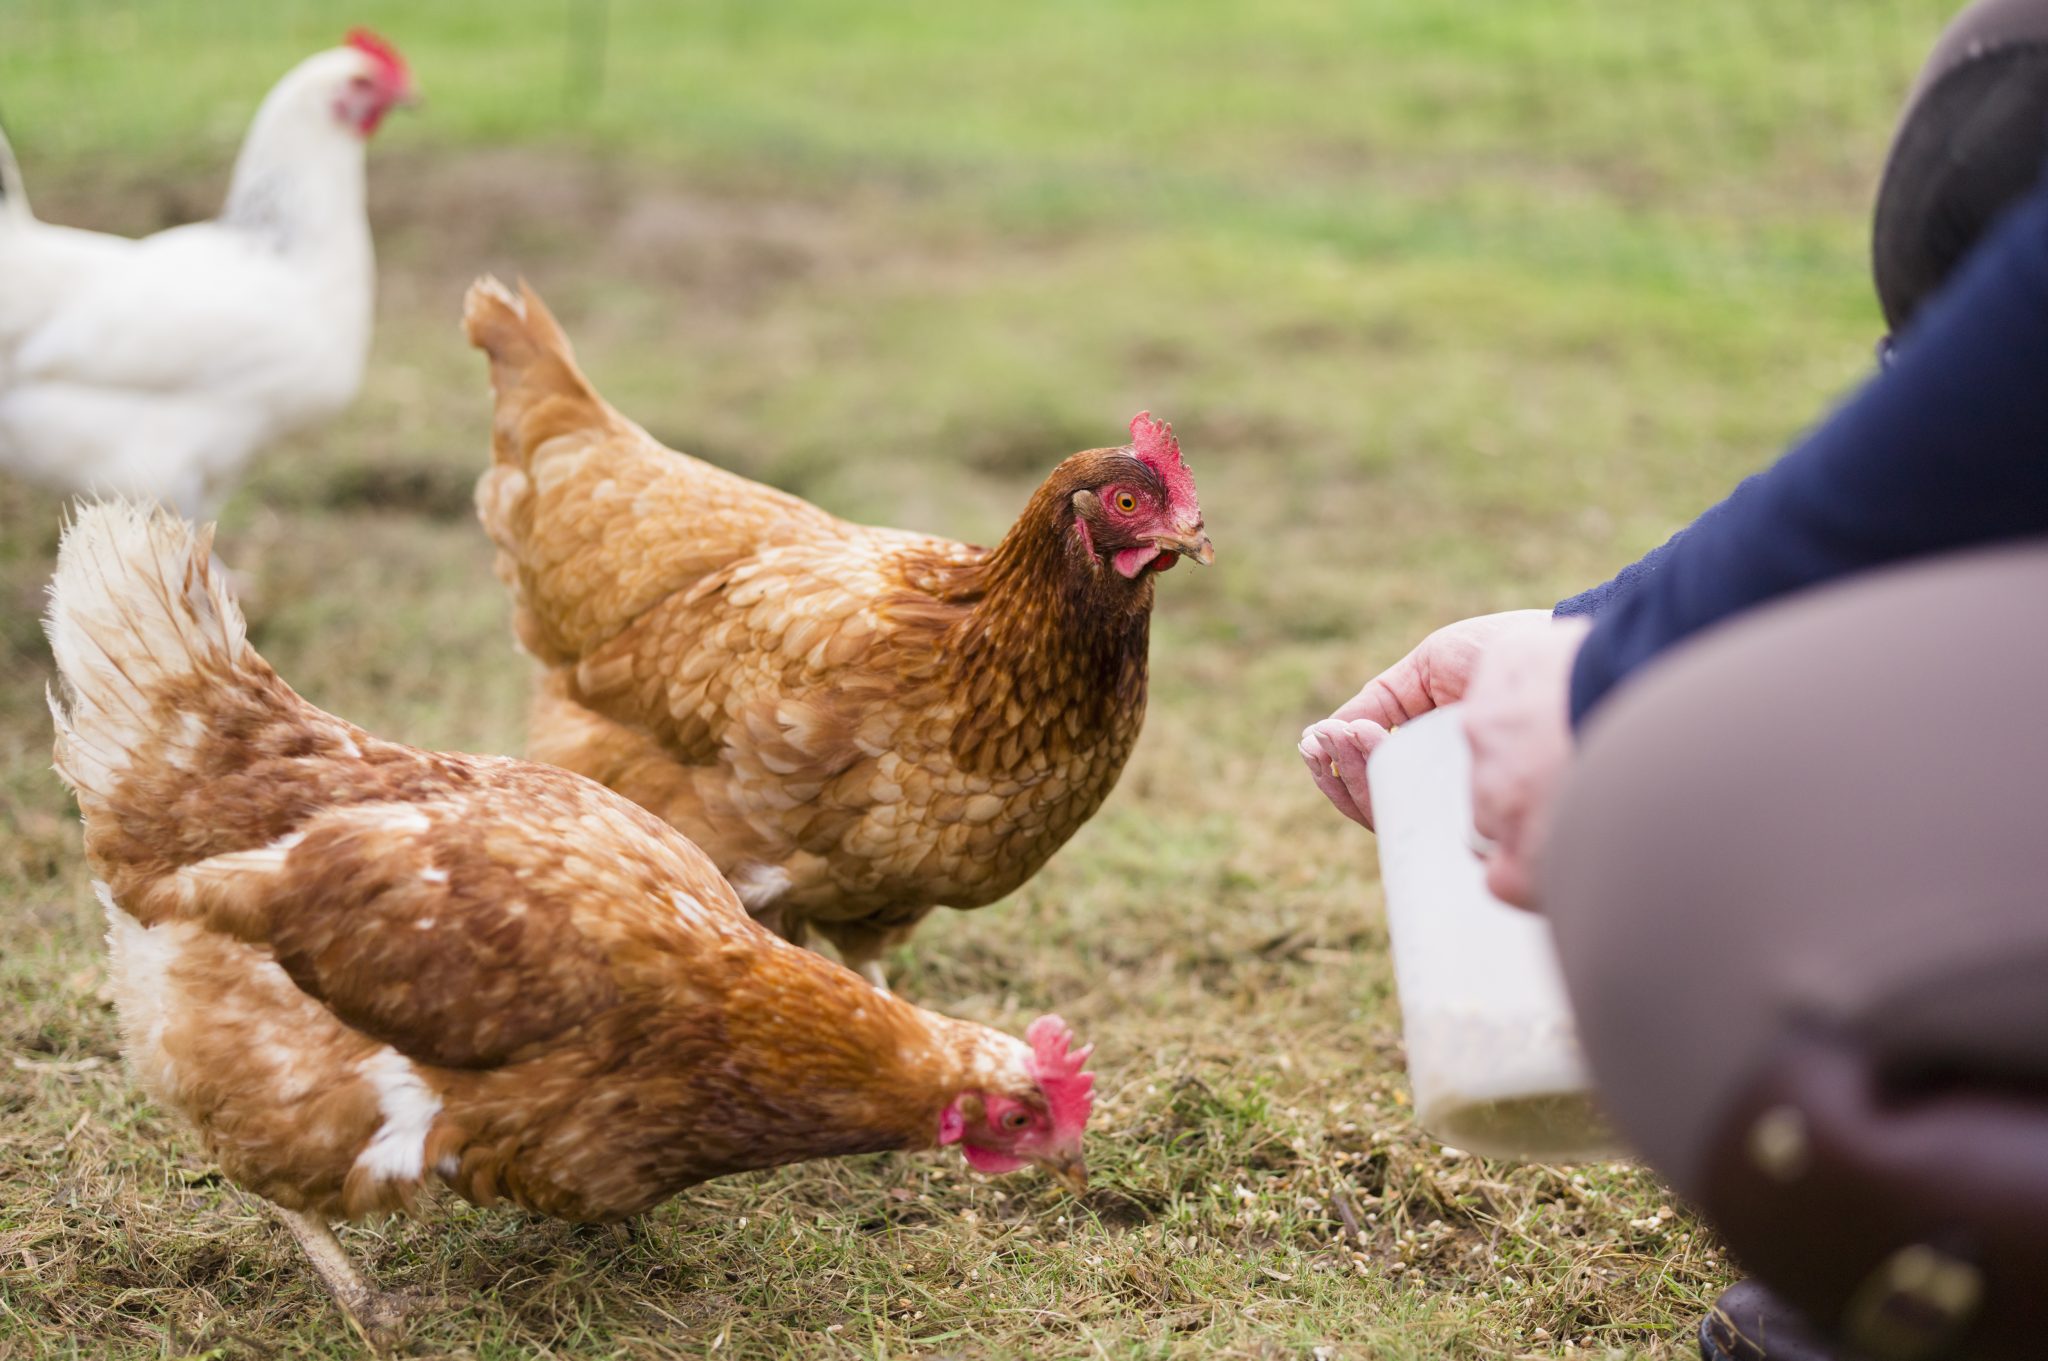 I. Introduction to the Connection Between Hens and Nutrition